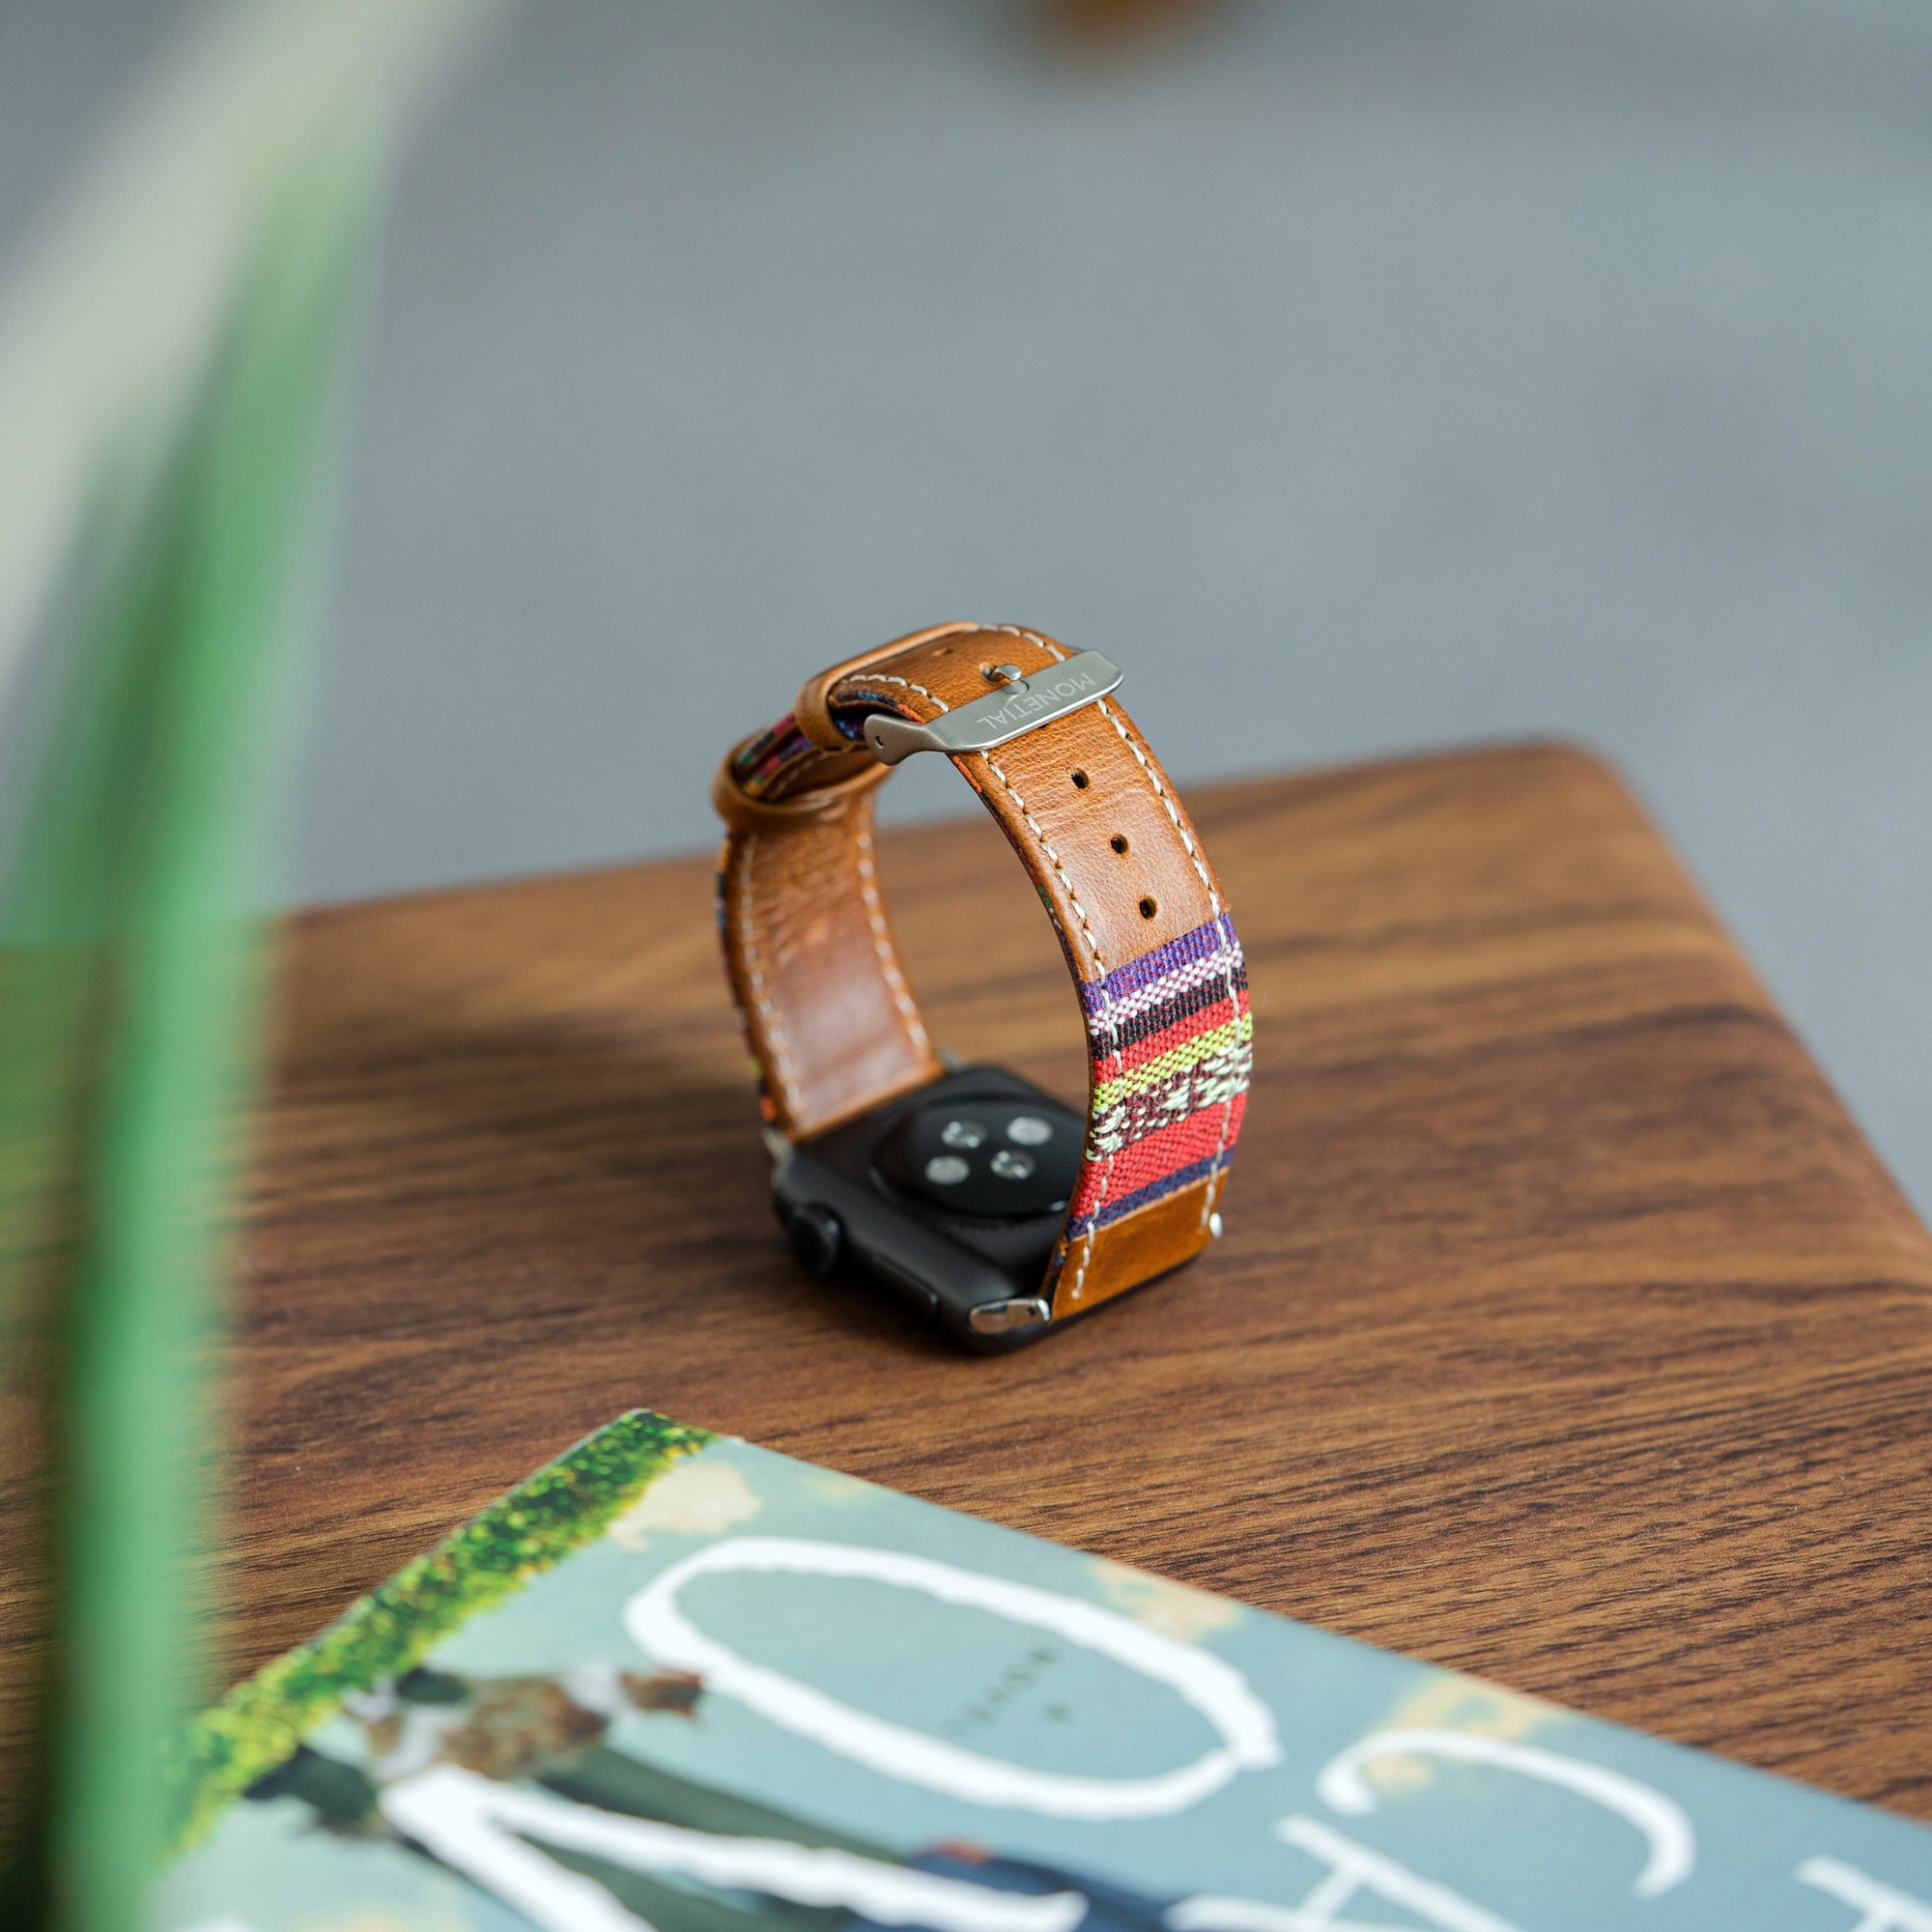 Nomad Apple Watch Bands | Monetial 